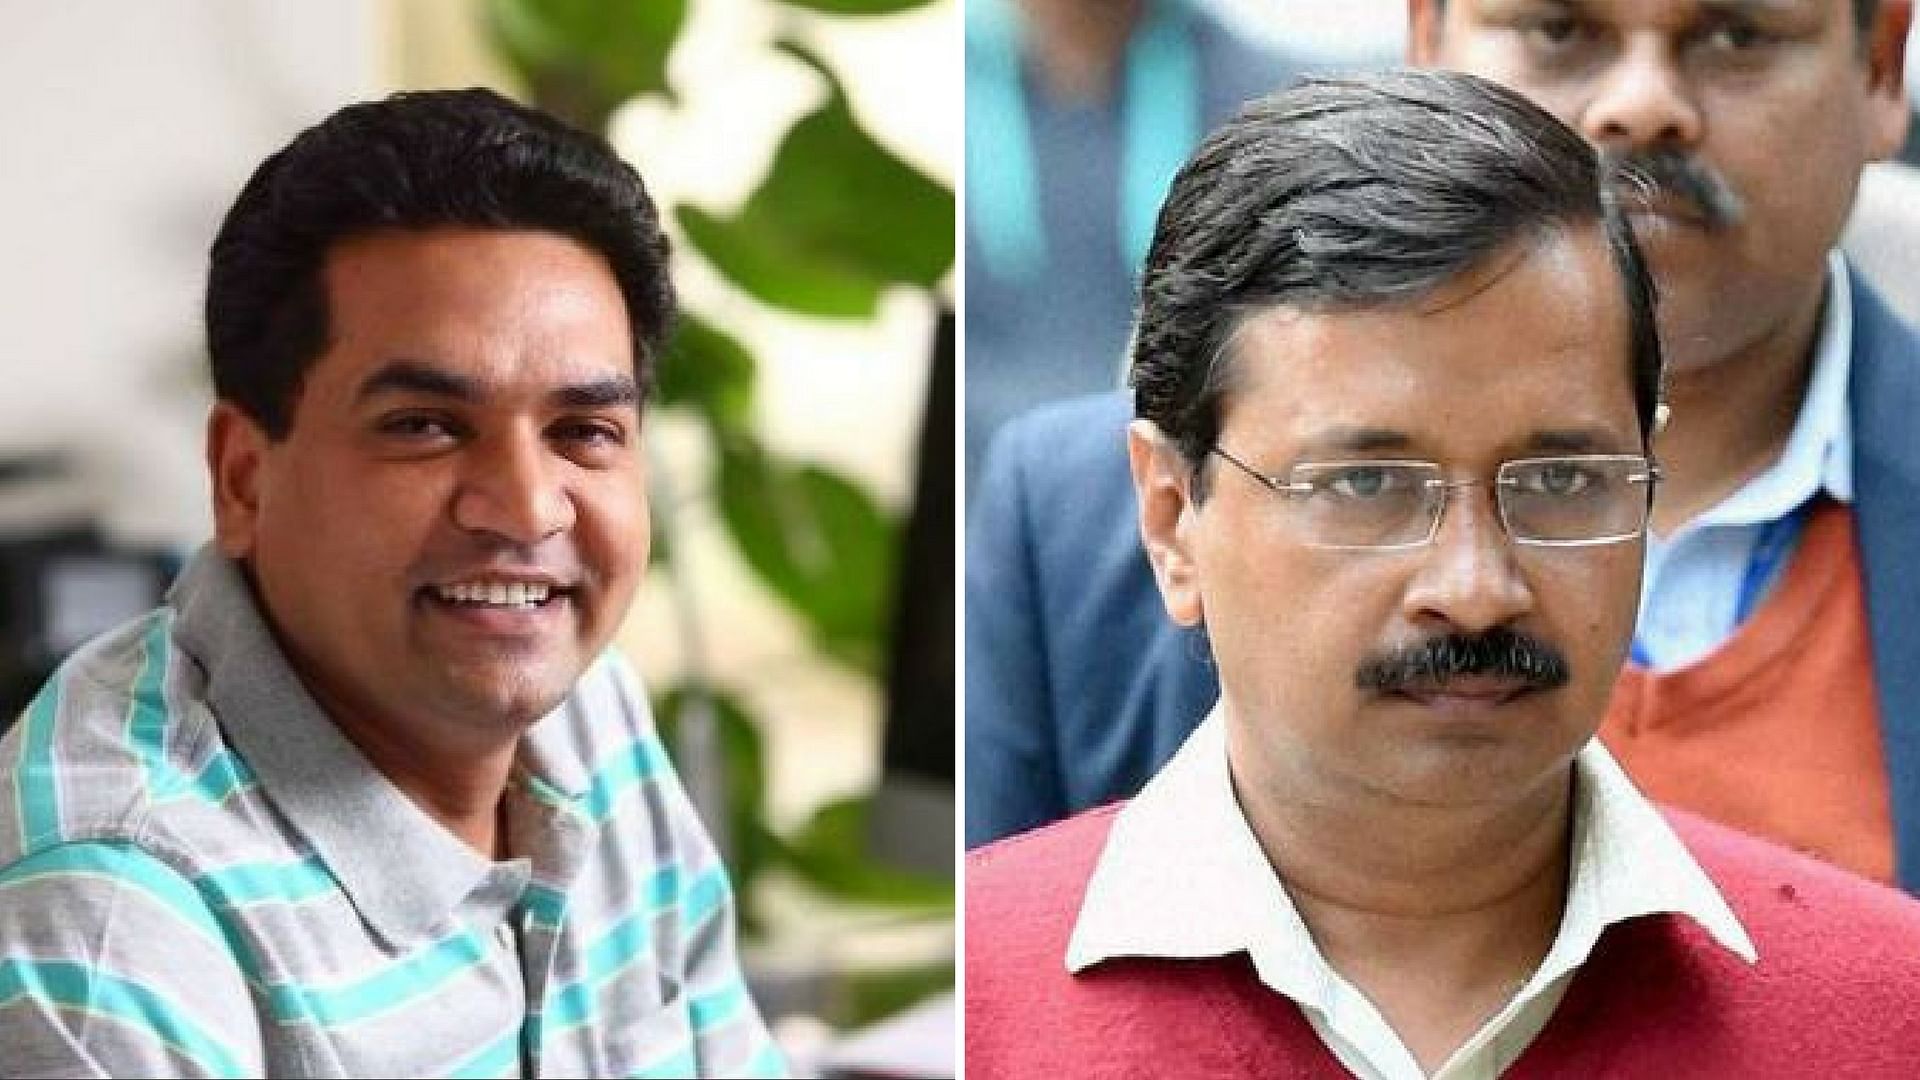 Kapil Mishra has mentioned seven matters of “corruption”, including an “exchange” of Rs 2 crore between Kejriwal and Health Minister Satyendar Jain (Photo Altered by<b> The Quint</b>)